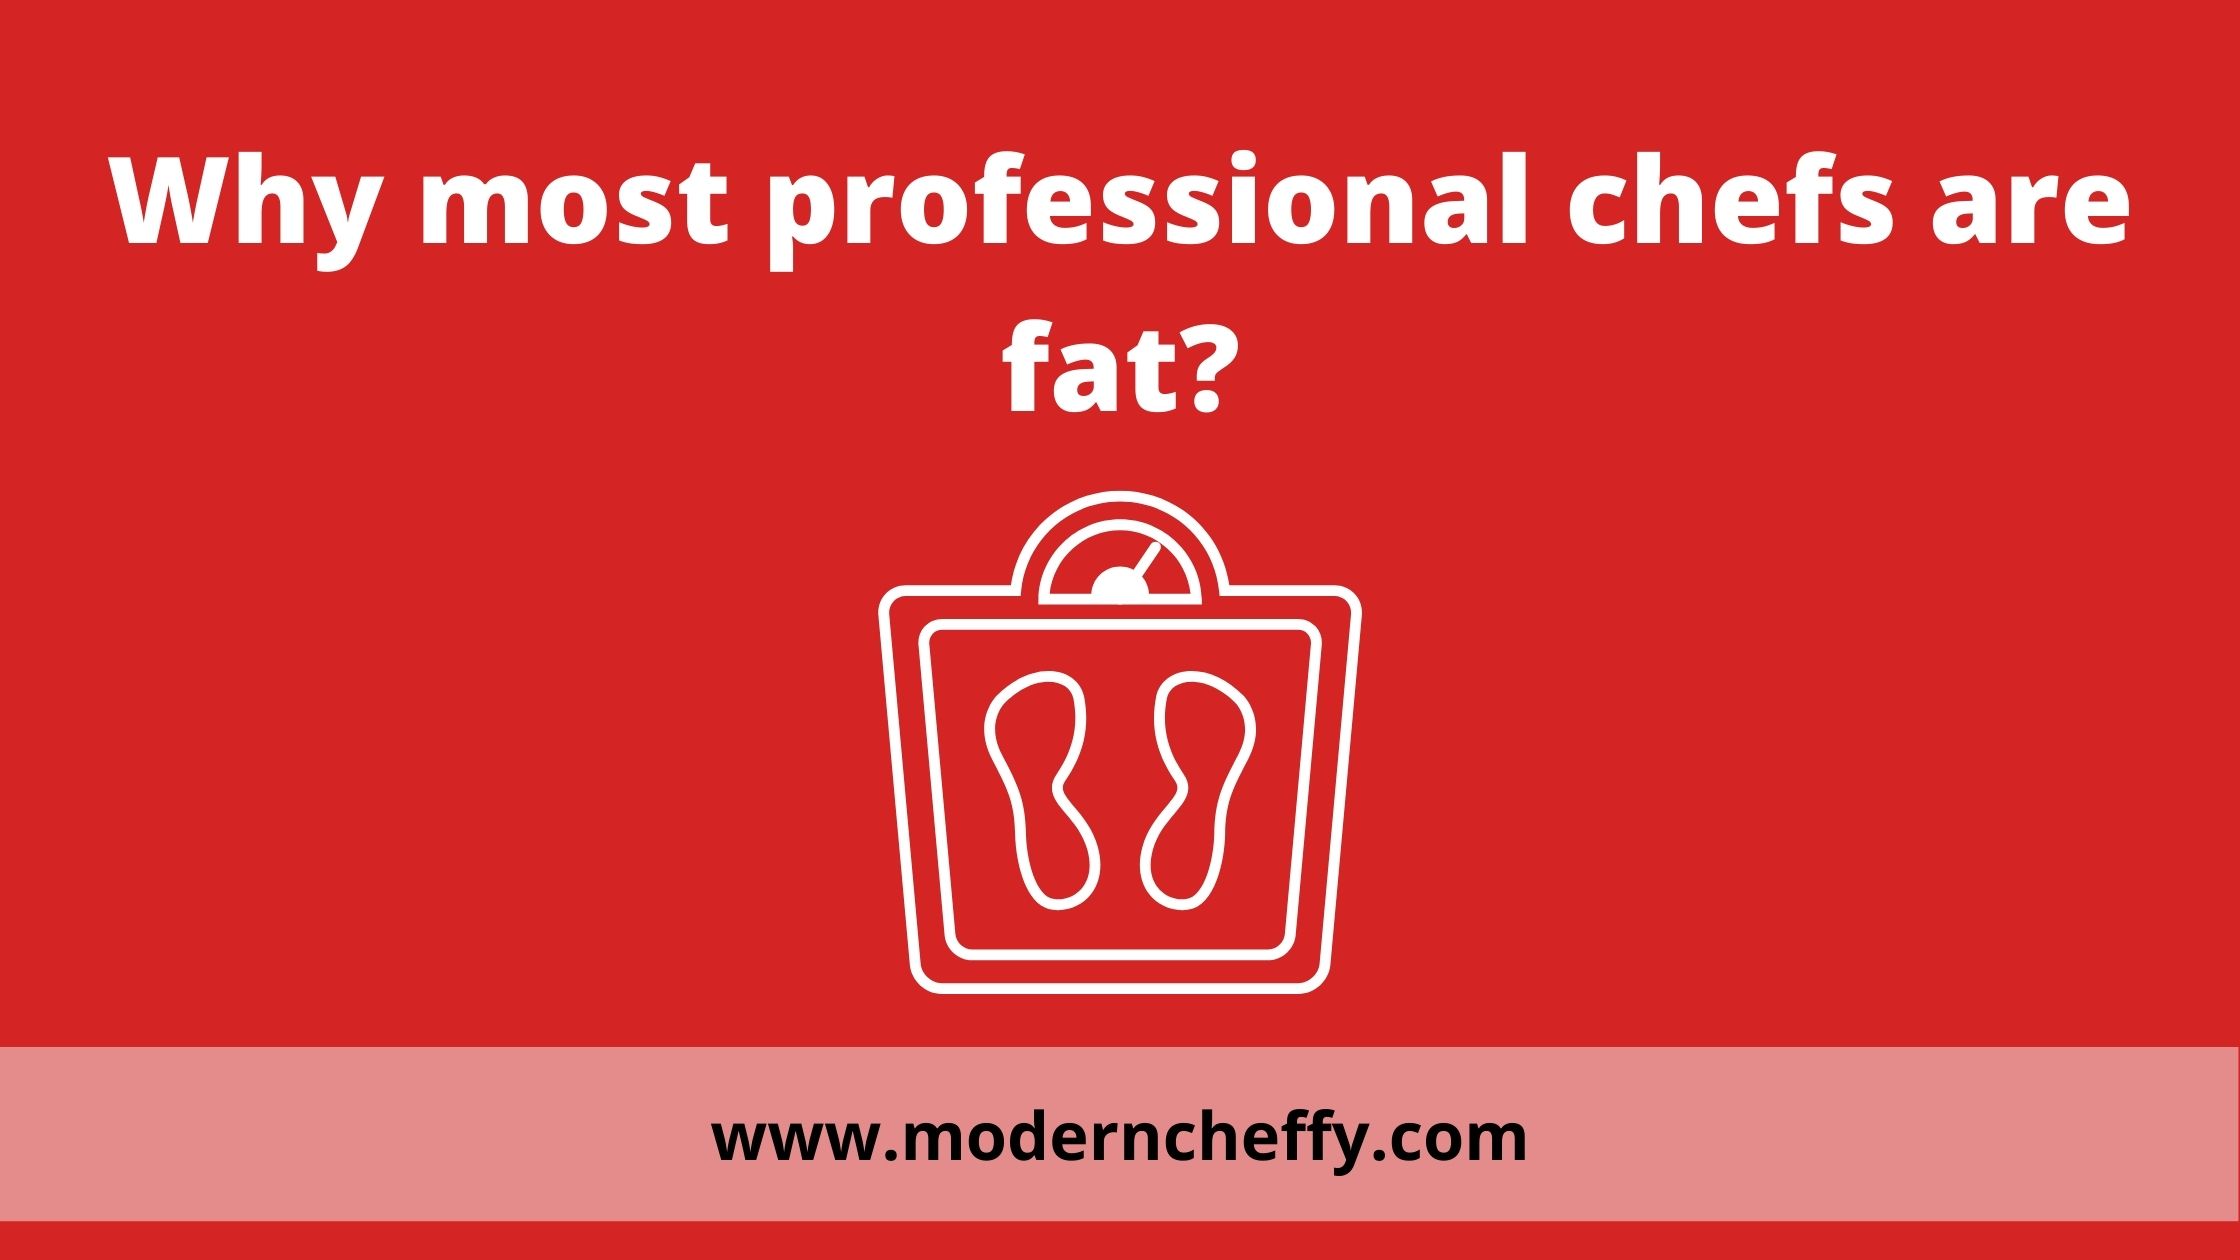 Why most professional chefs are fat